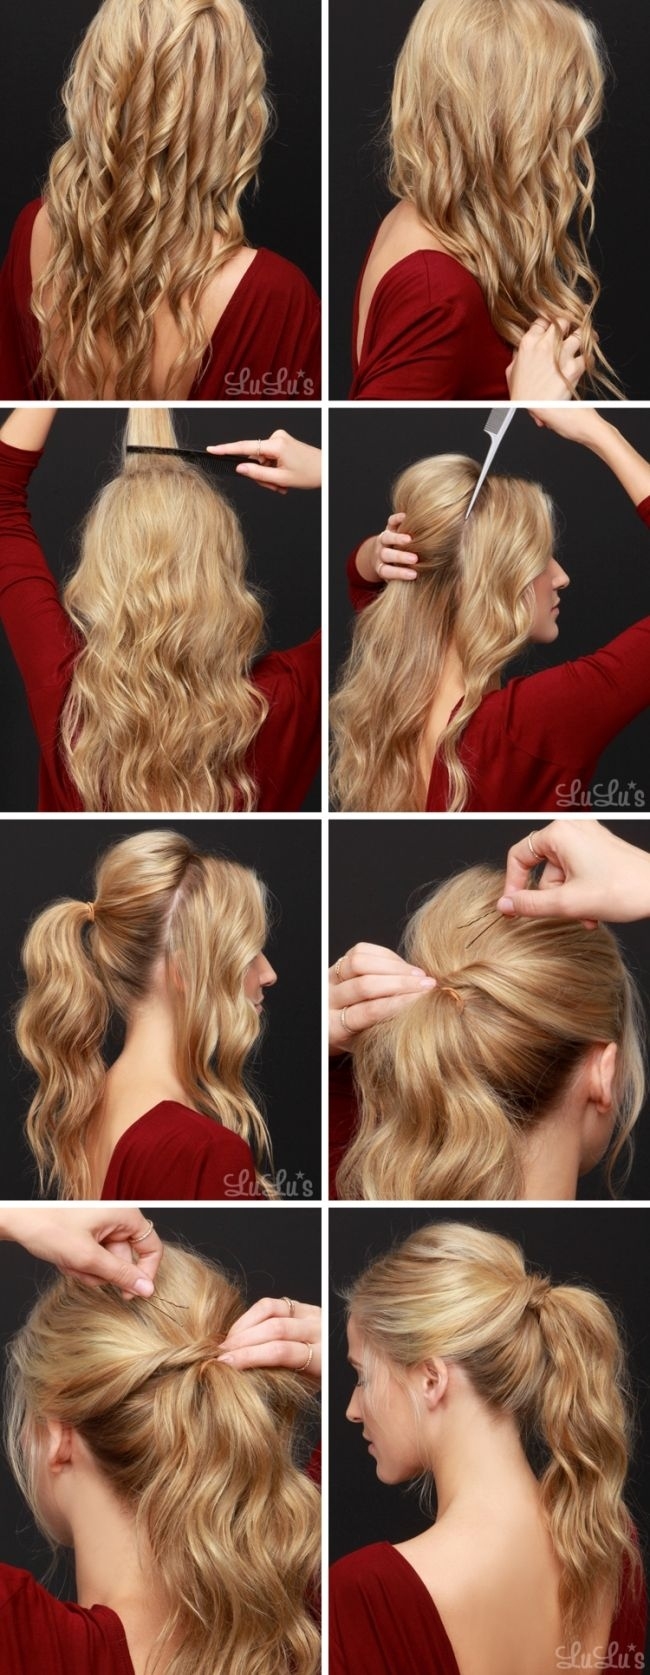 Pinterest with regard to Hairstyle For Wedding Party Step By Step